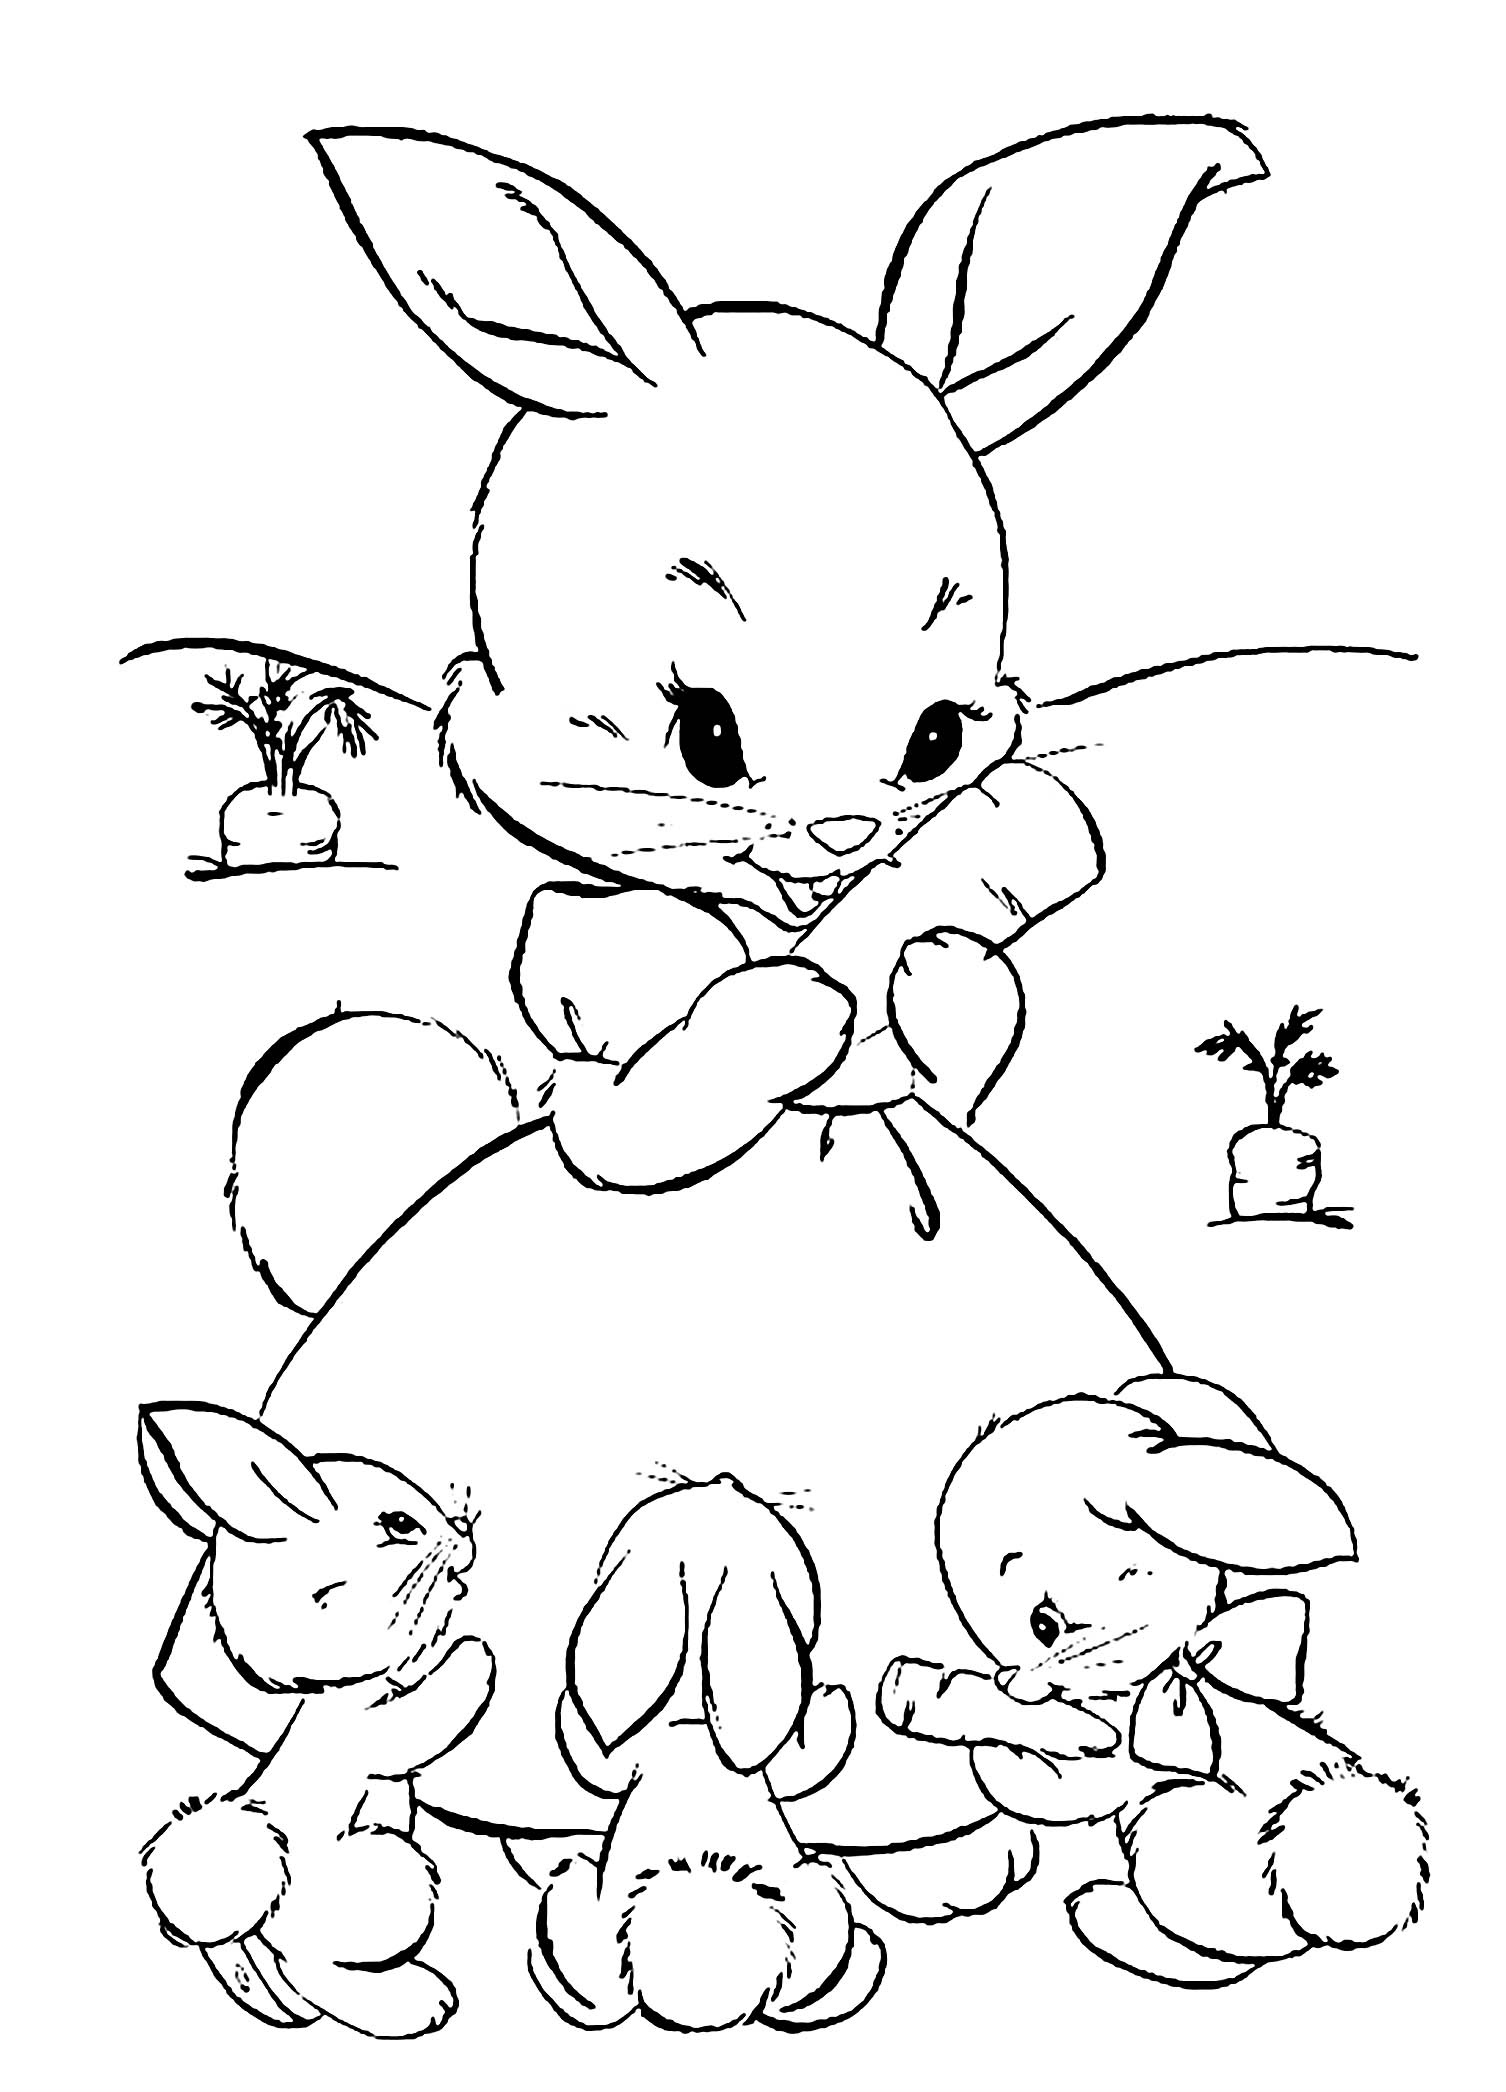 year-of-the-rabbit-colouring-page-3o5umhjs5